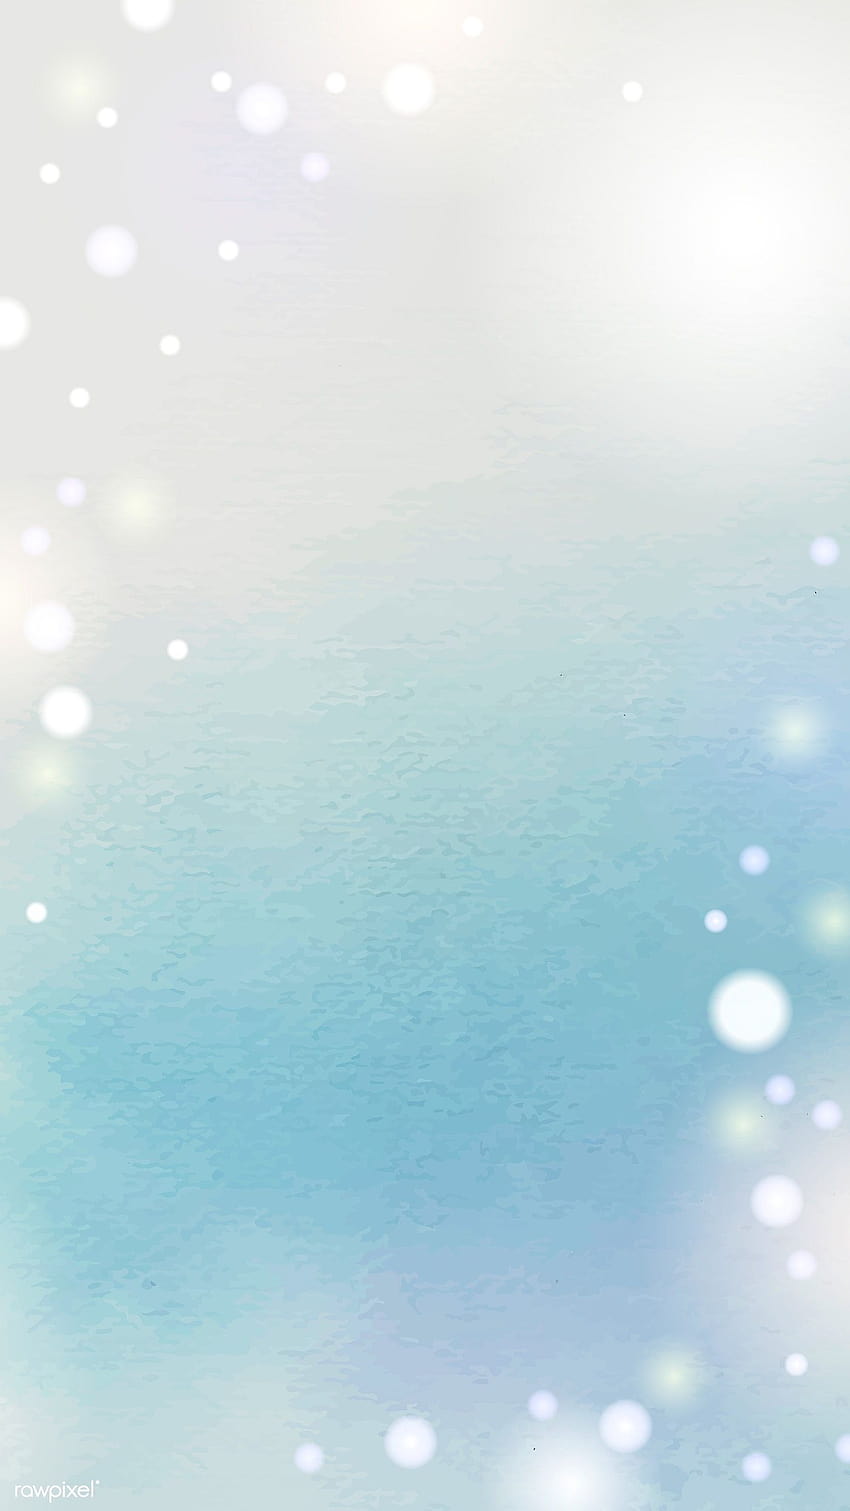 Dreamy winter watercolor mobile backgrounds, gradient phone HD phone ...